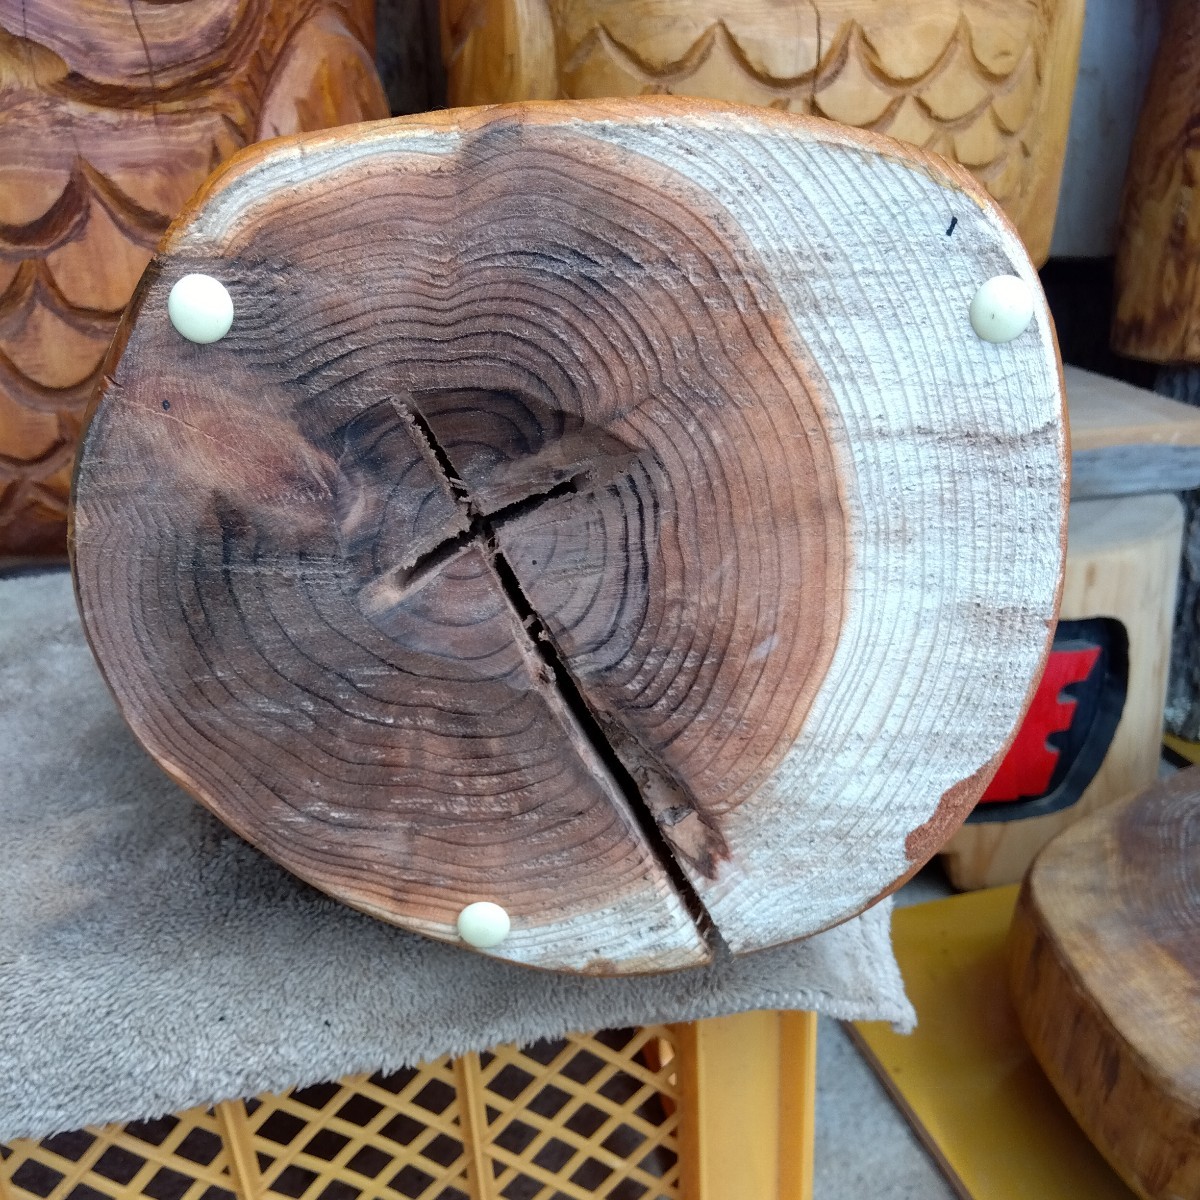  interval . material ( Japanese cedar )... work made did original work. changer so- art work (.).... diameter 25. rom and rear (before and after) height 38cm weight 7..... delivery 100 size 